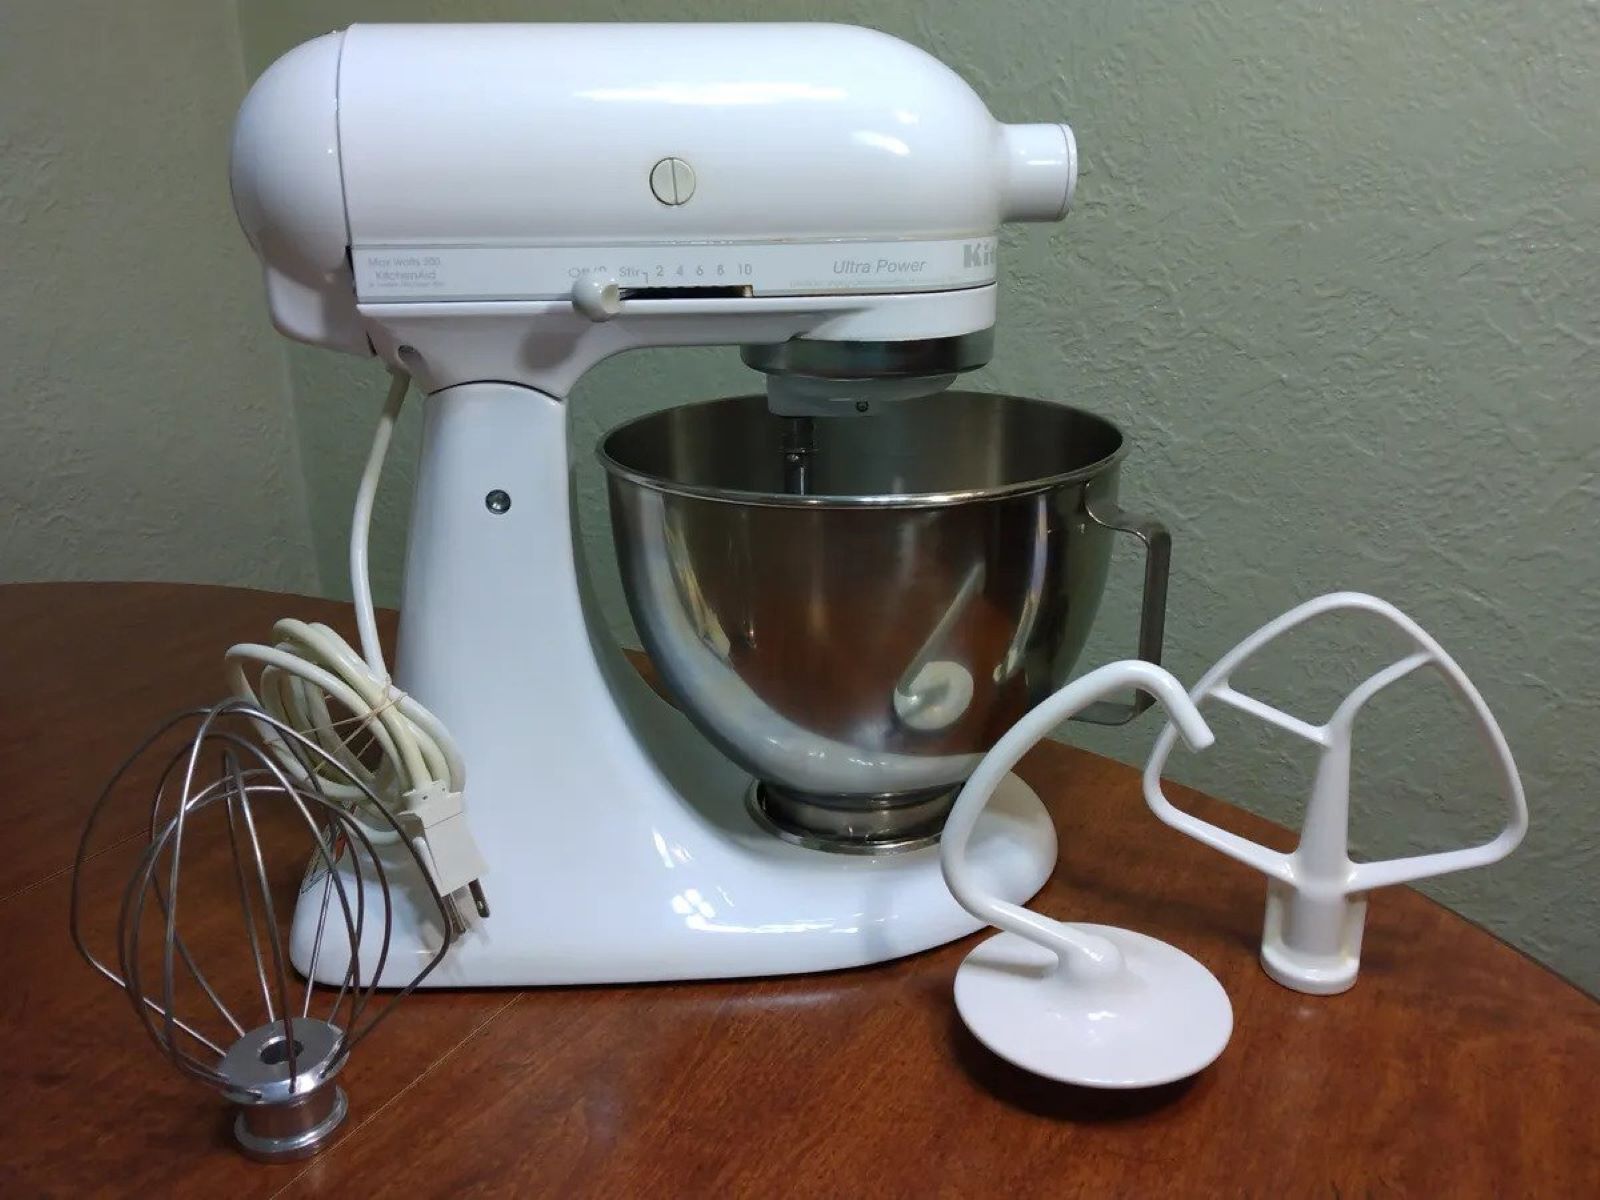 https://storables.com/wp-content/uploads/2023/09/how-to-store-stand-mixer-1695226268.jpg